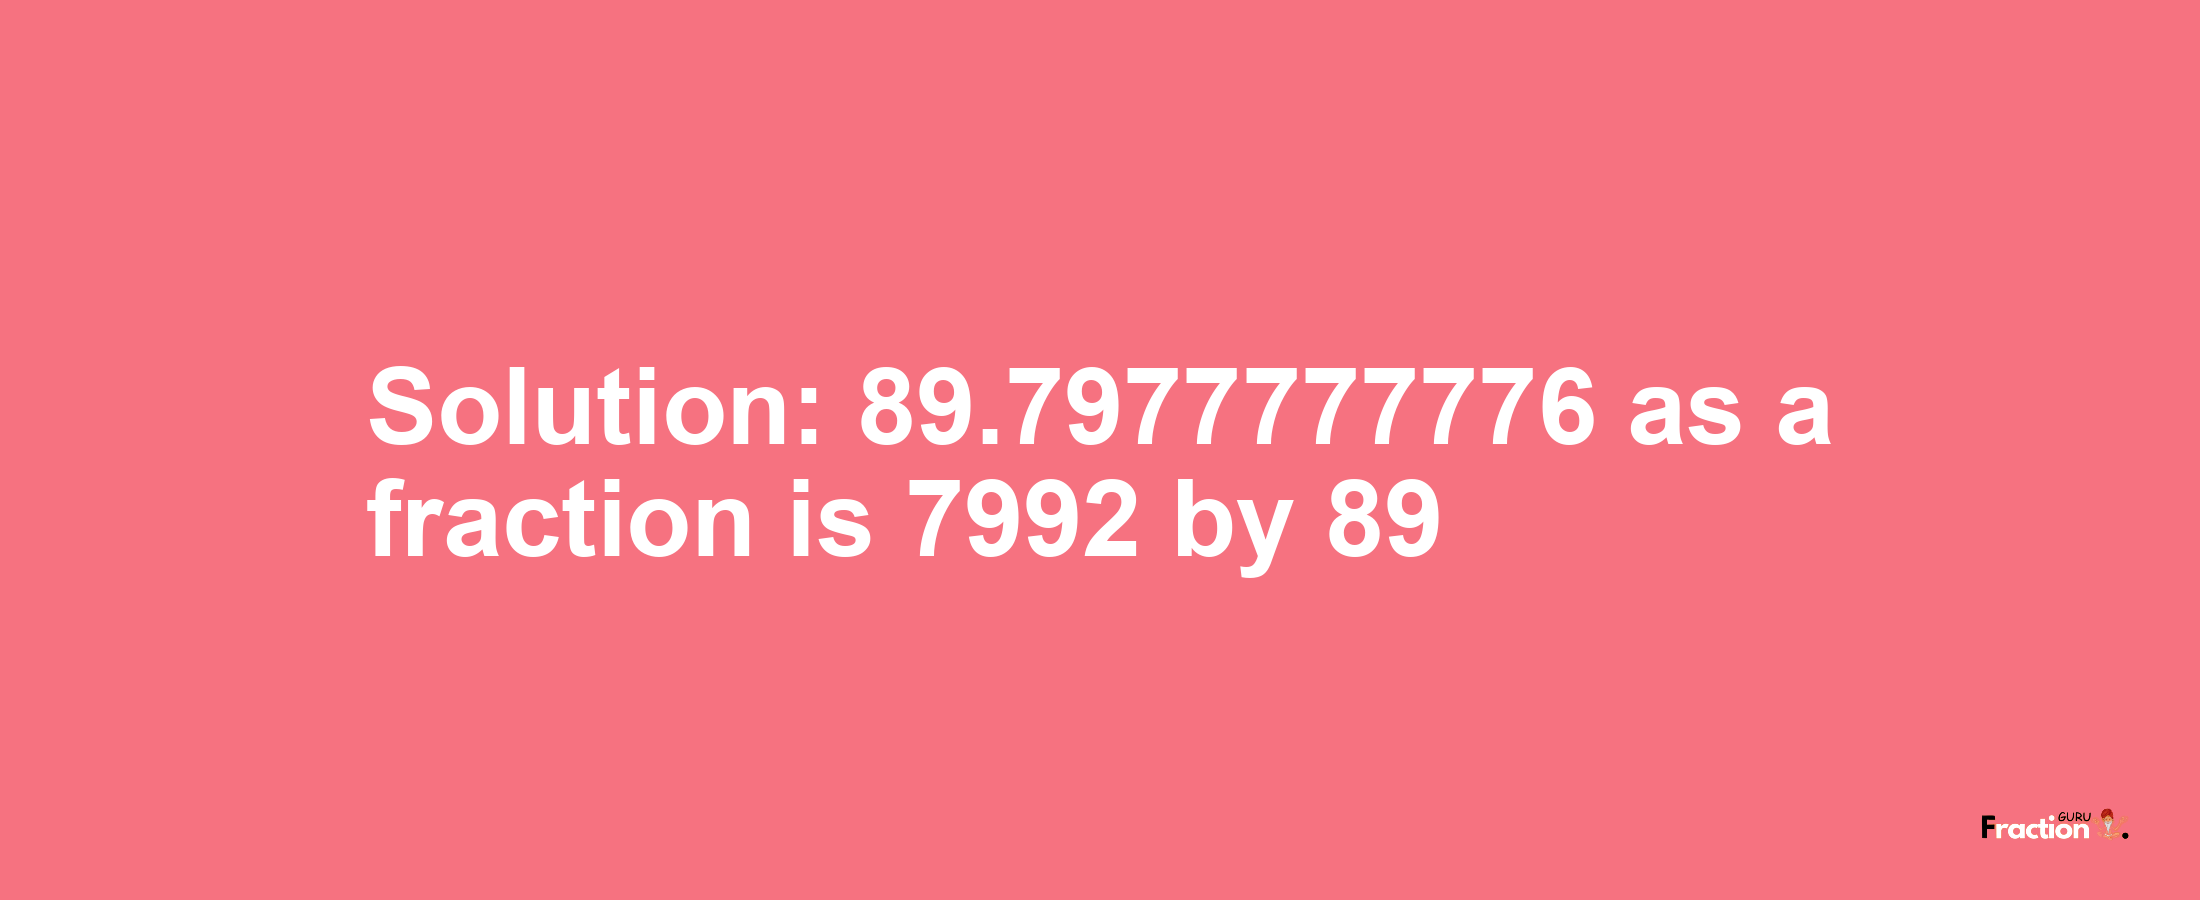 Solution:89.7977777776 as a fraction is 7992/89